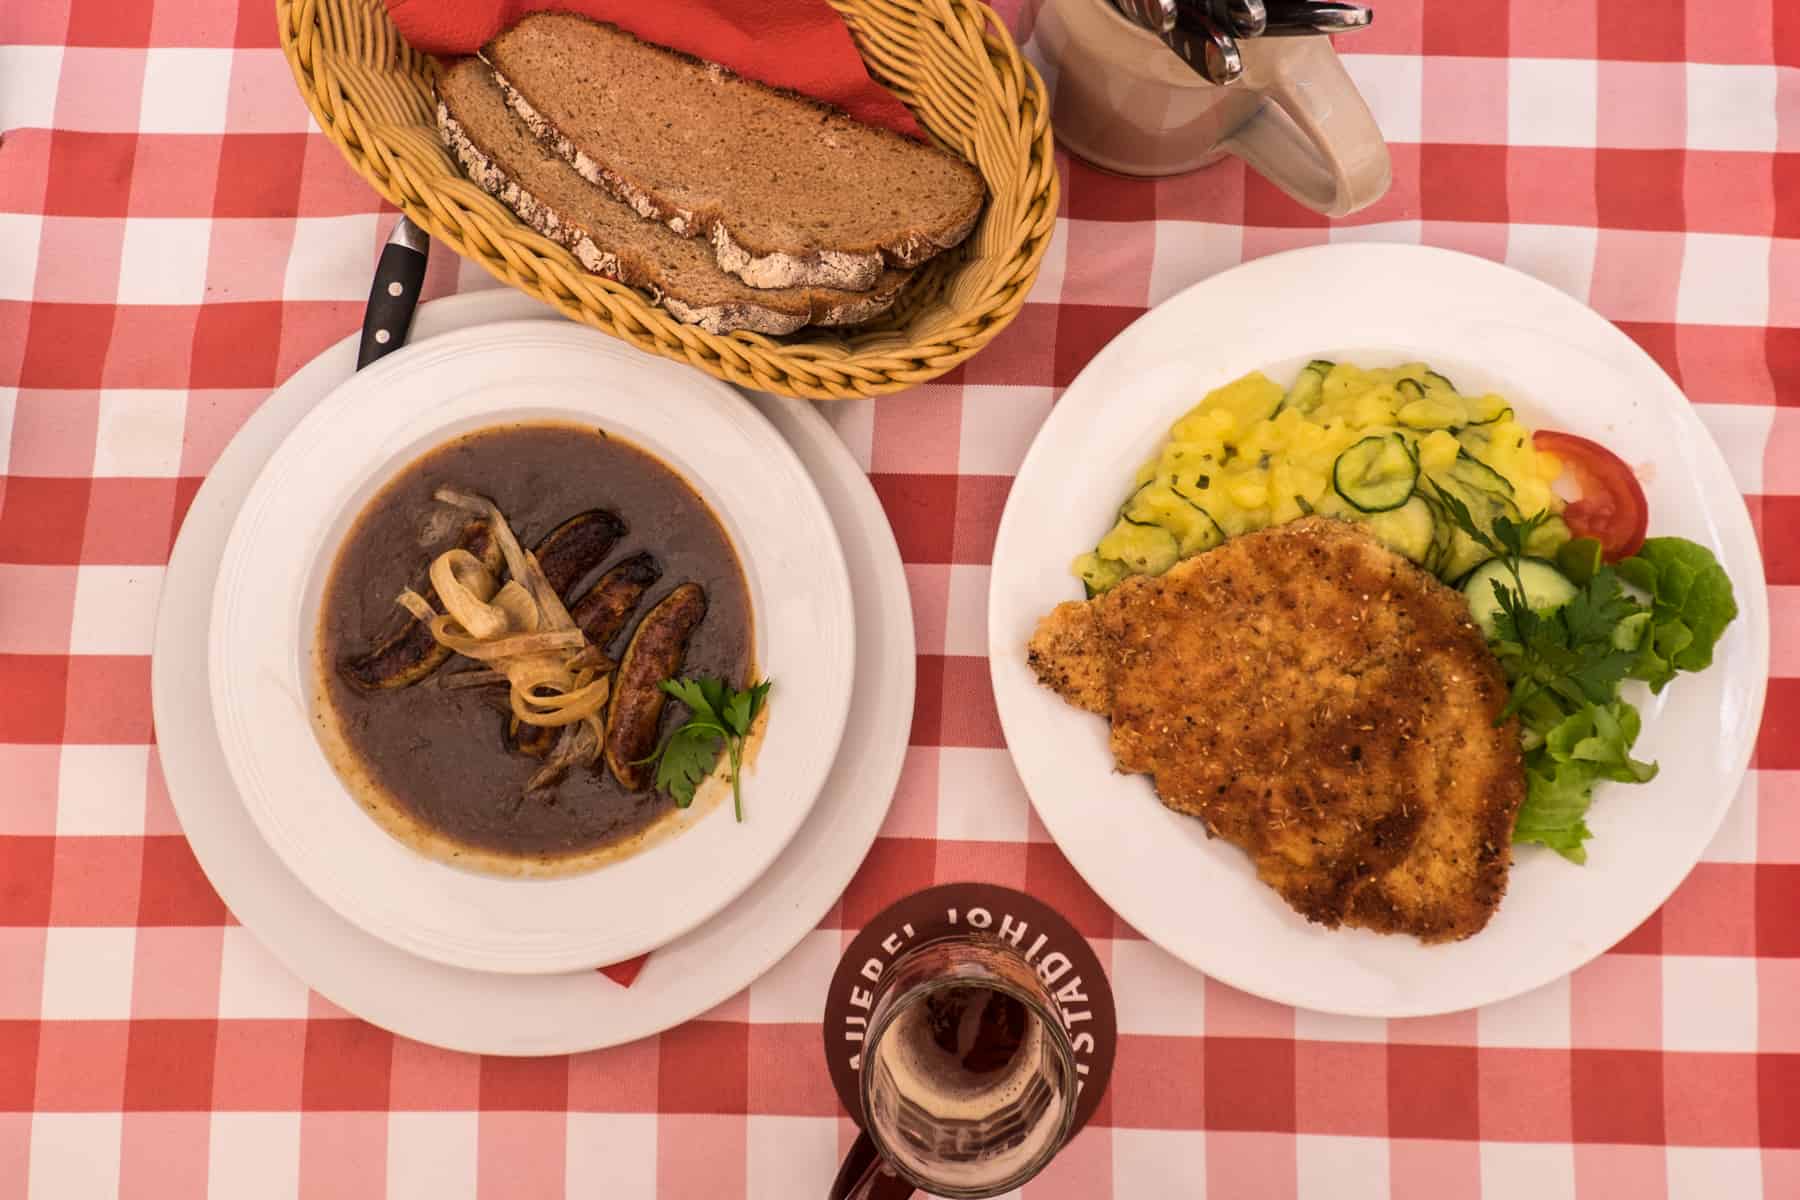 A red and white checkered tablecloth full of Nuremberg food specialities -beer battered schnitzel, a dish of nuremberg sausages in gravy, alongside a basket of bread and a beer